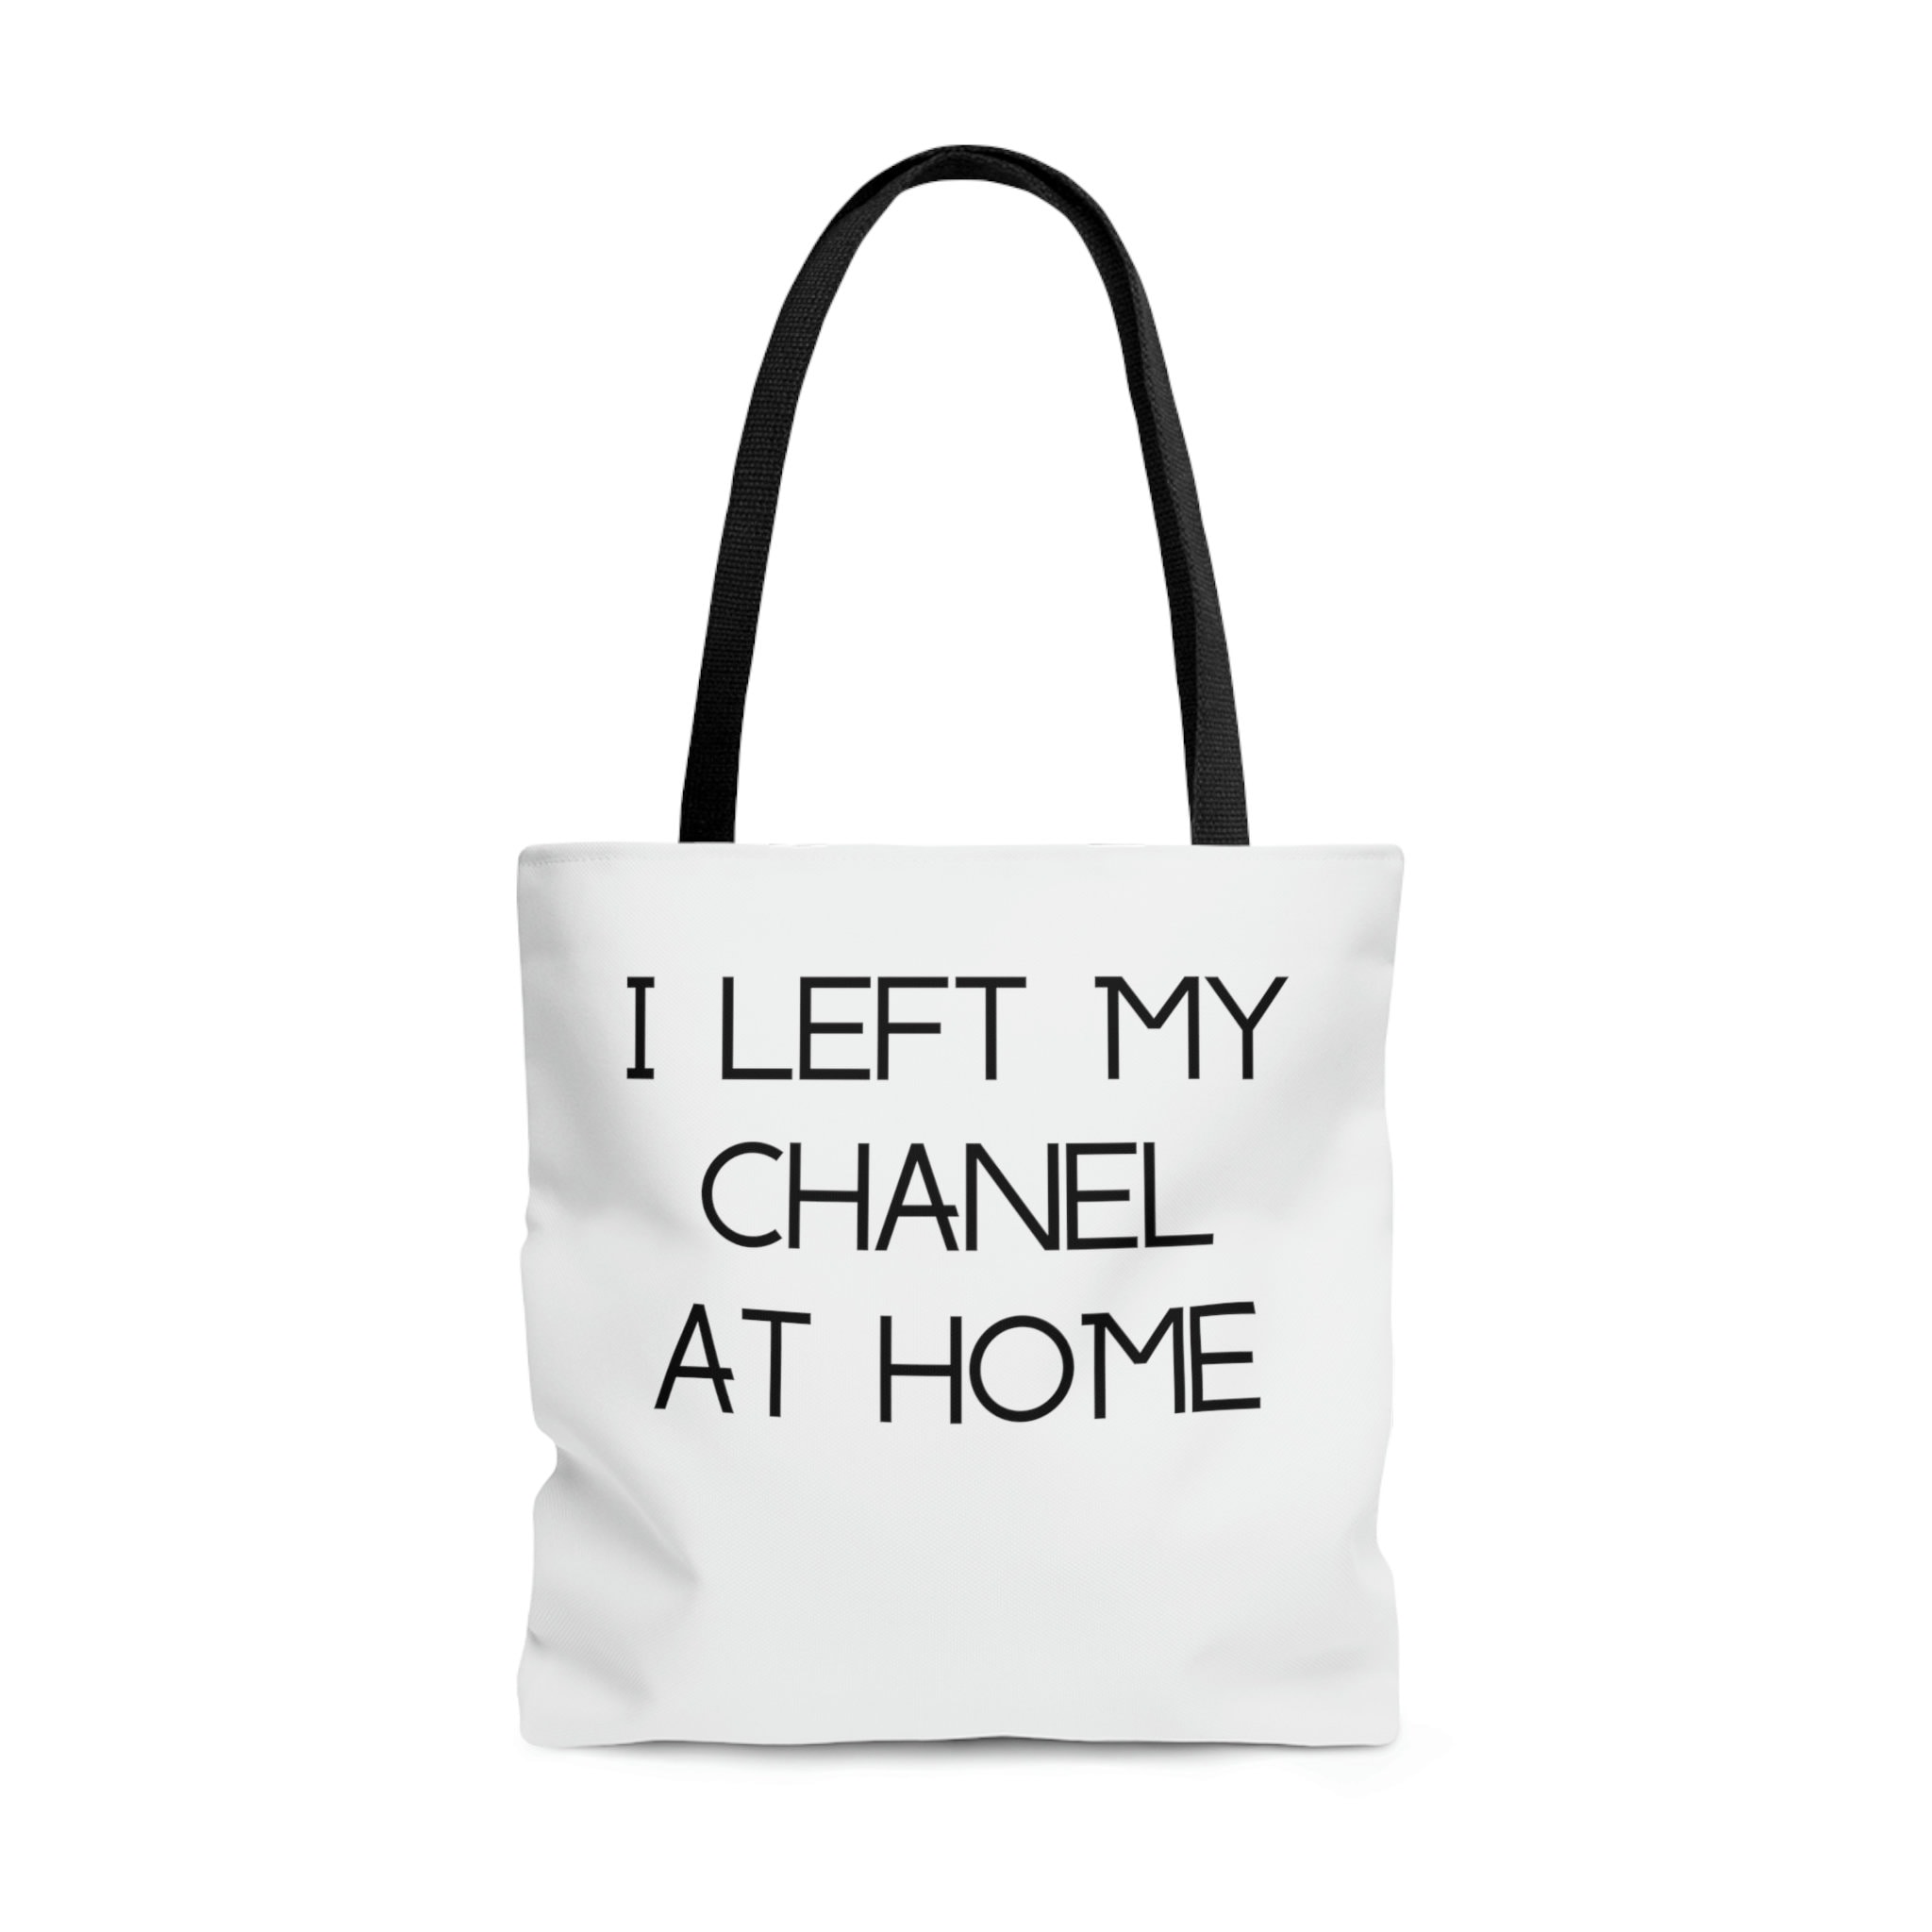 My Chanel Tote – HouseofShimmer